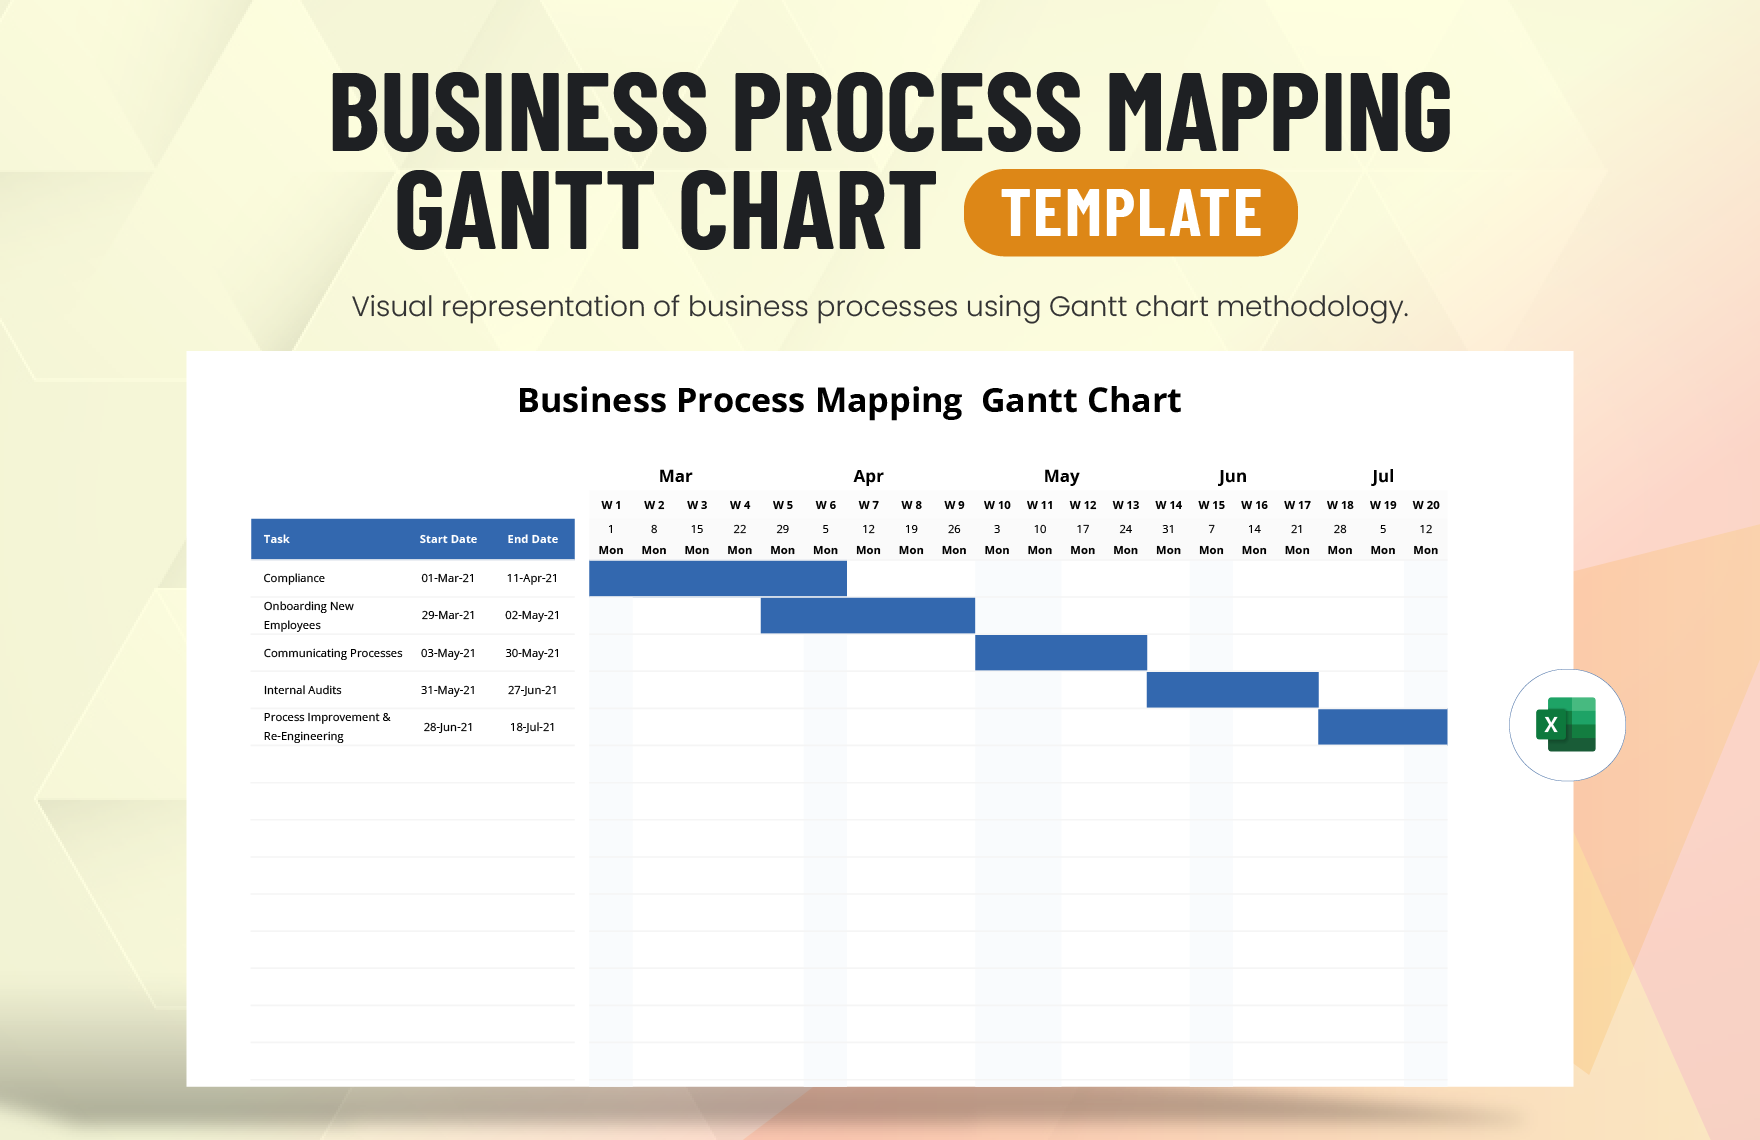 Business Process Mapping Gantt Chart Template in Excel